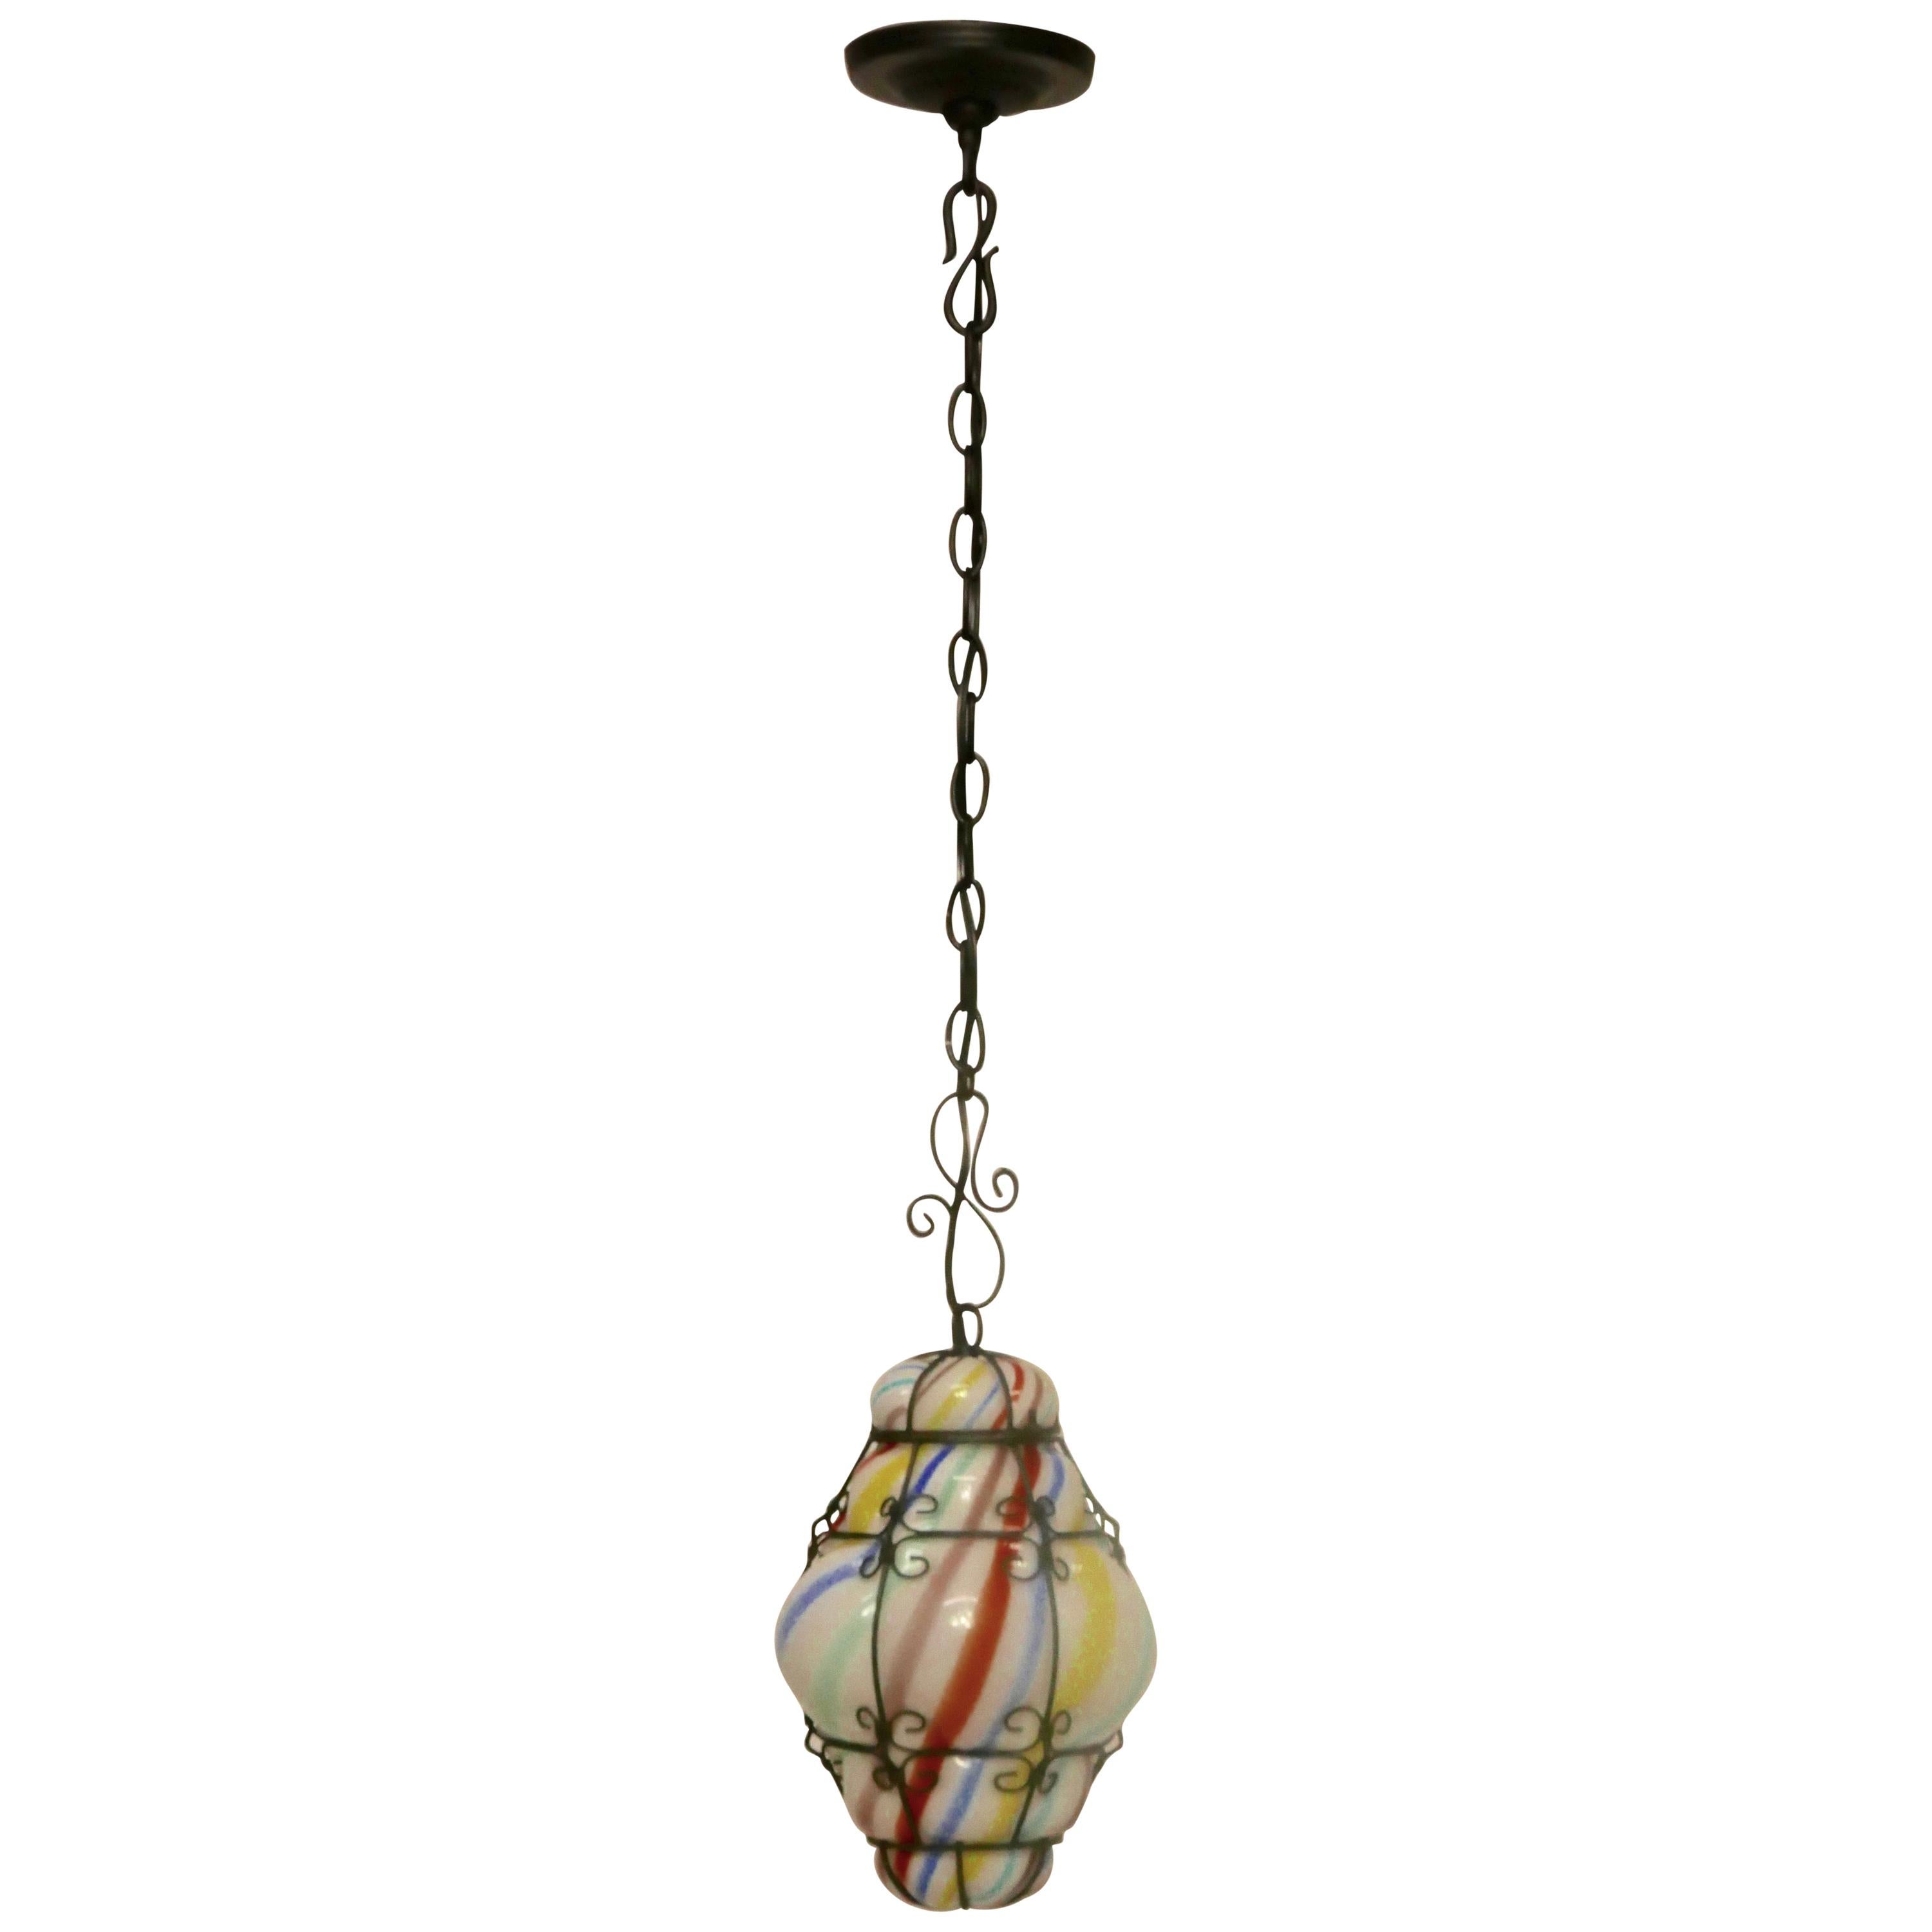 Venetian Shaped Frosted Glass and Metal Hanging Pendant For Sale at 1stDibs